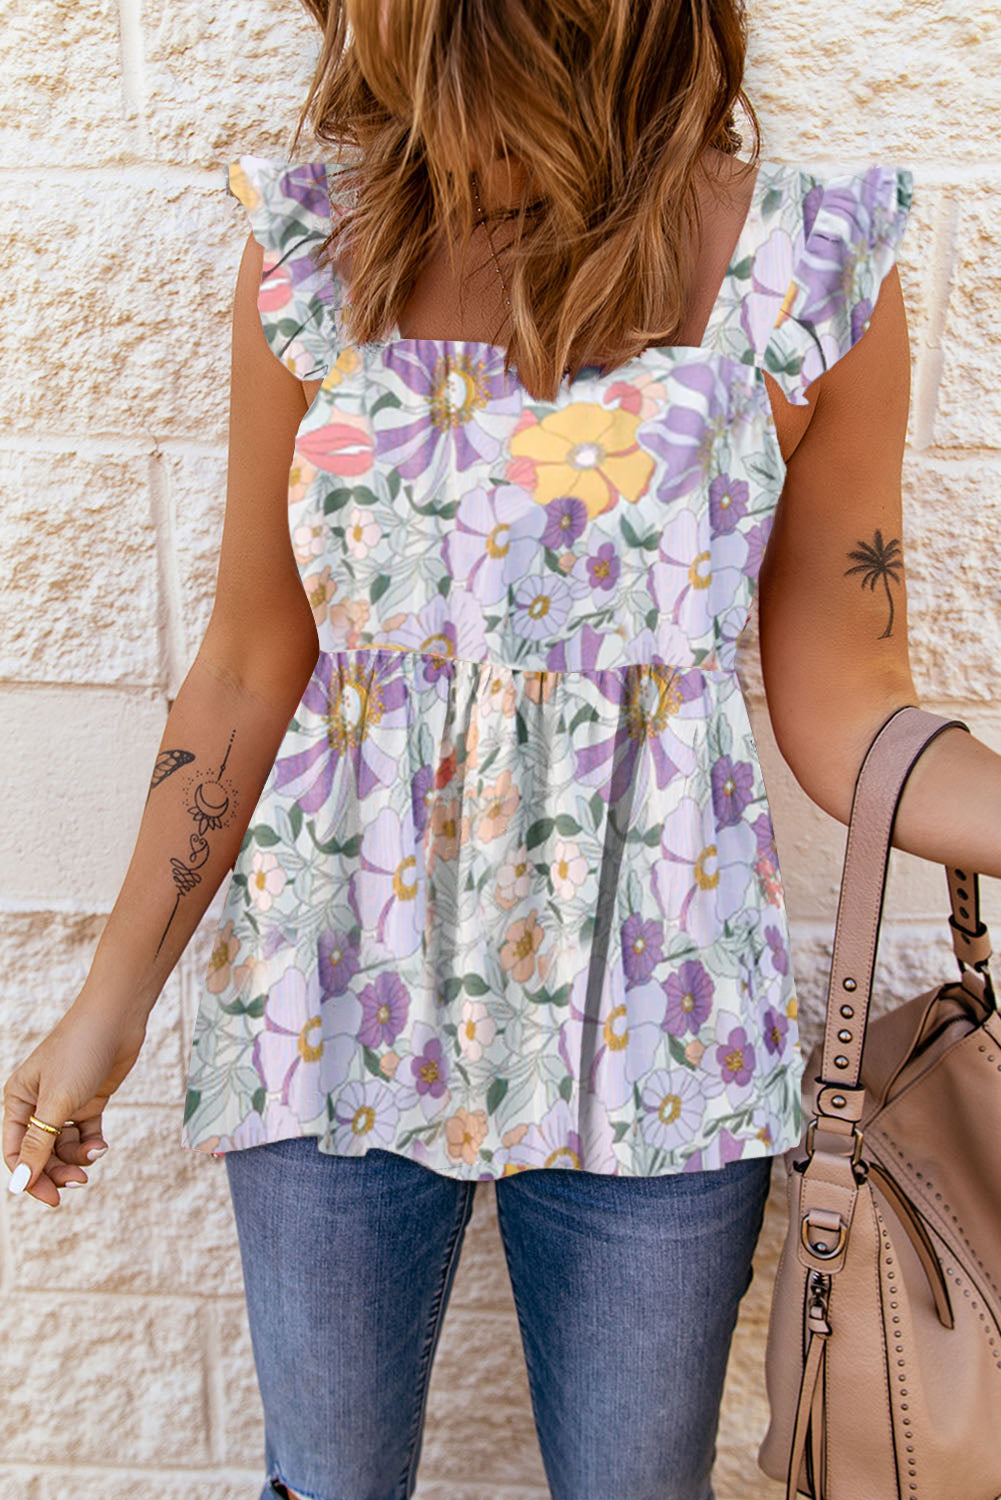 Floral Square Neck Babydoll Top - Lavender / S - Tops & Tees - Shirts & Tops - 3 - 2024